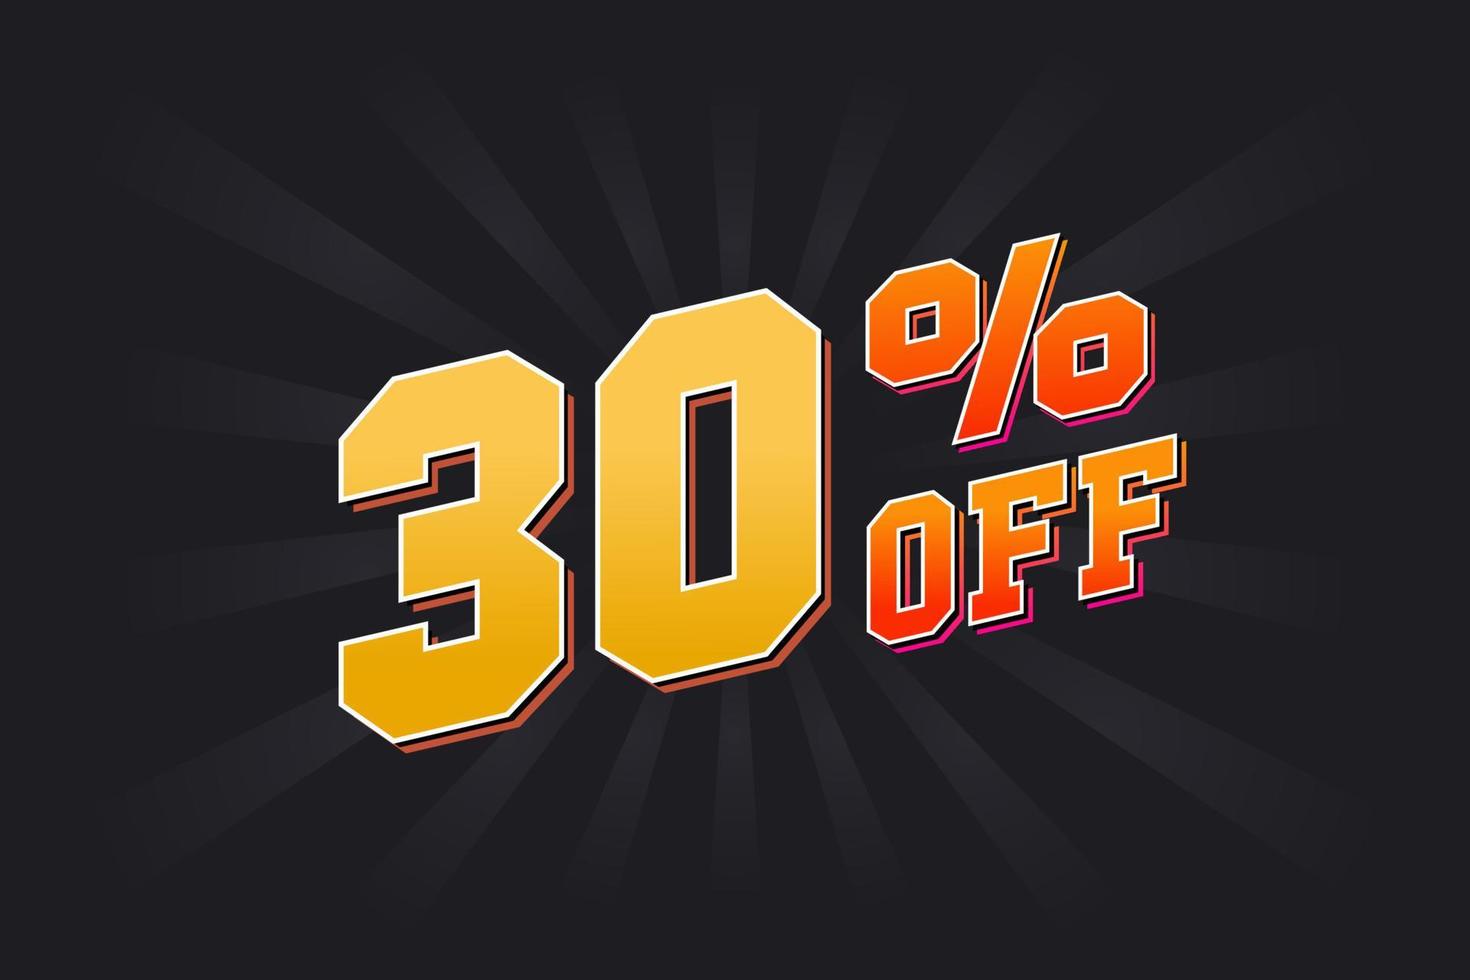 30 Percent off Special Discount Offer. 30 off Sale of advertising campaign vector graphics.